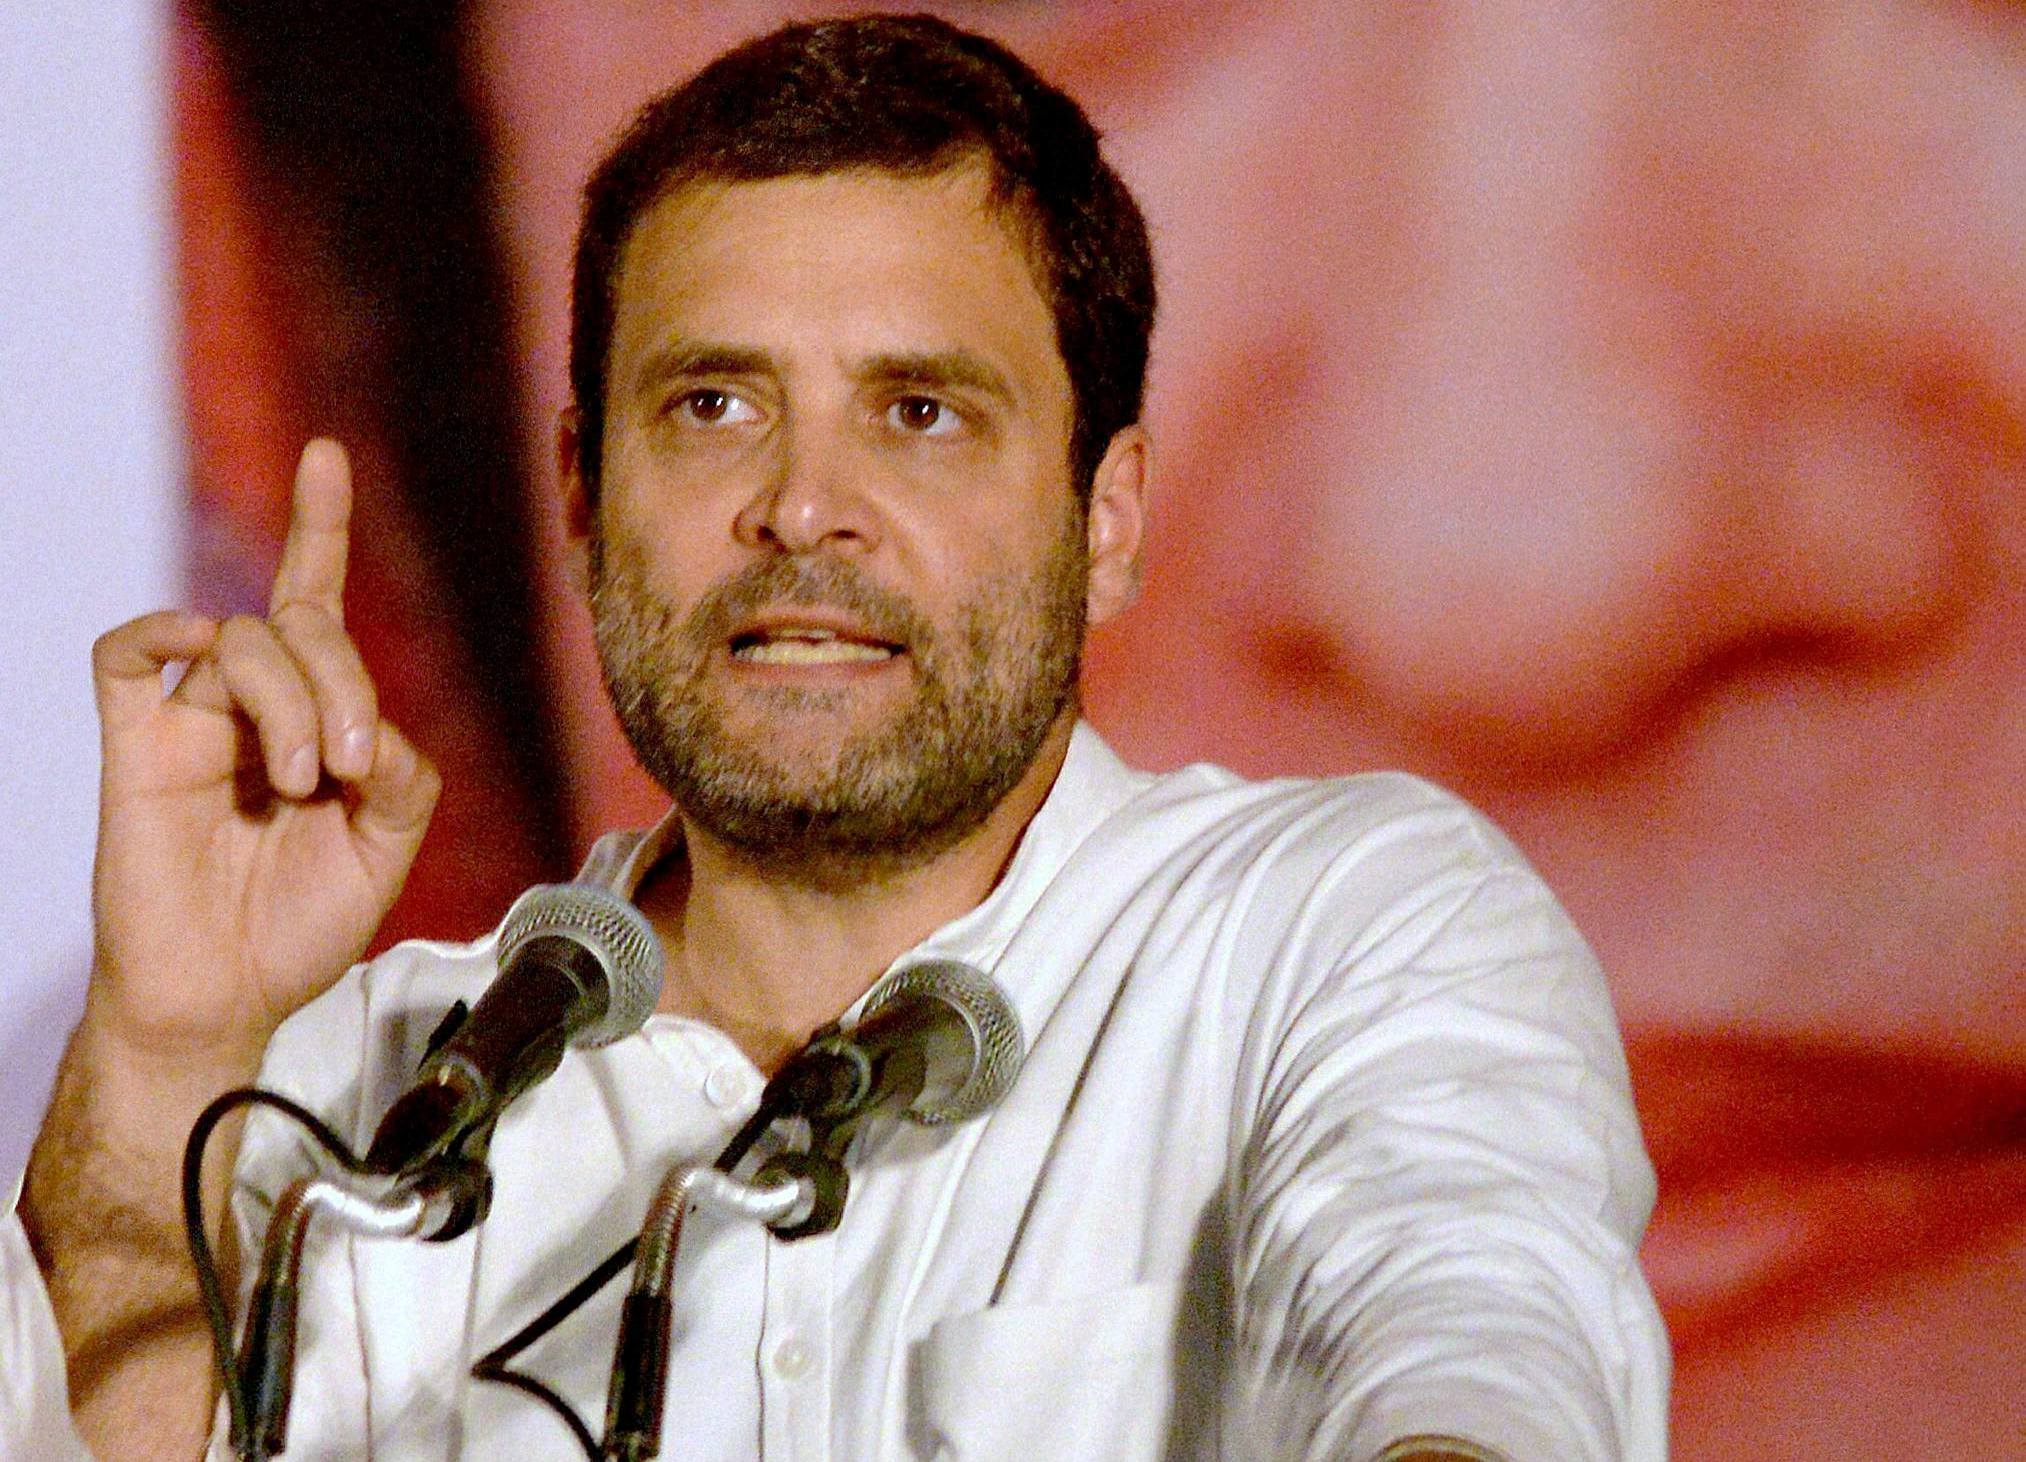 Congress expects Rahul Gandhi to take over as party chief this year: Ramesh